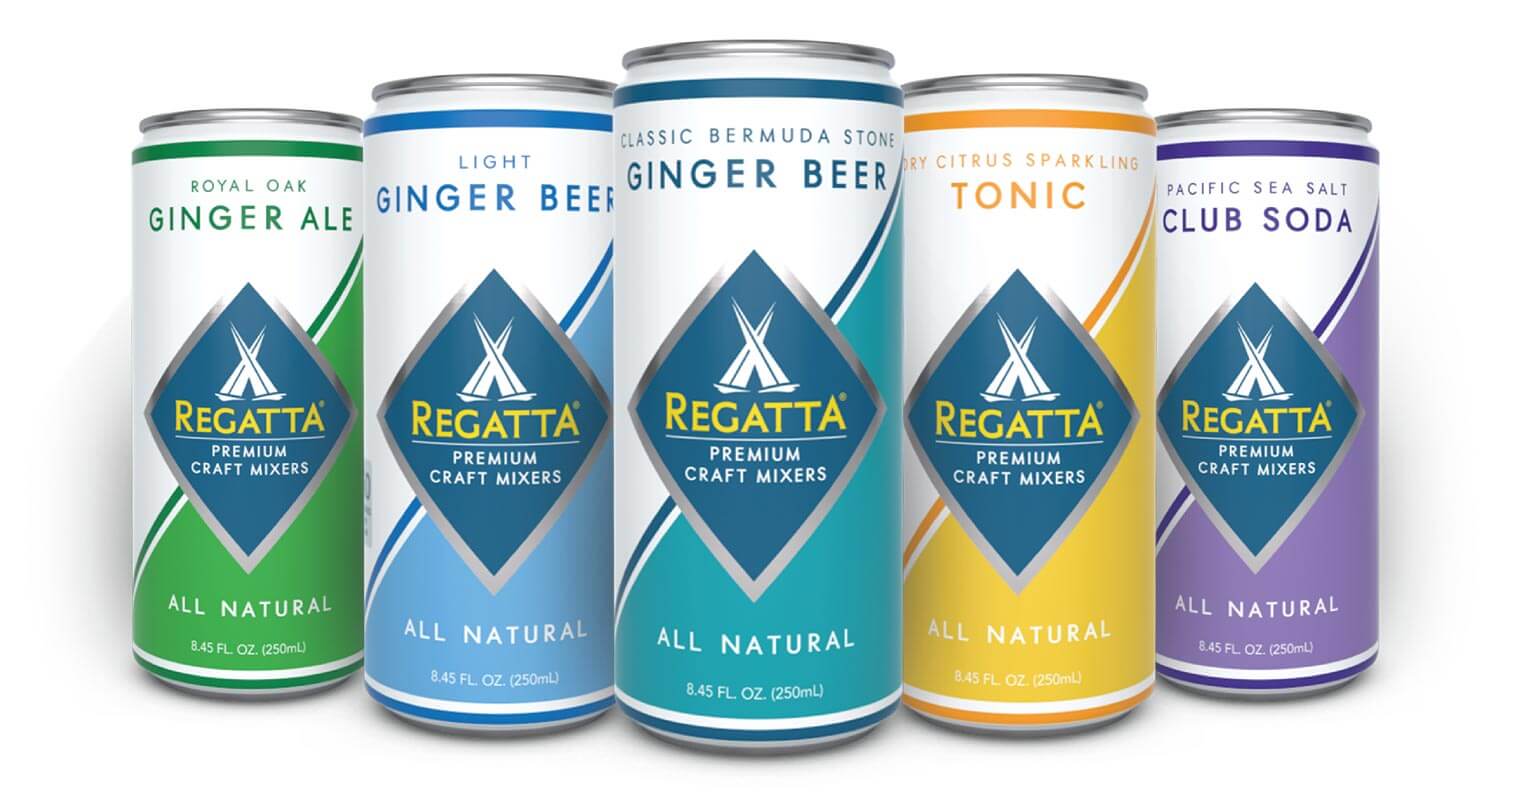 Regatta's Craft Mixer Lineup, cans on white, featured image